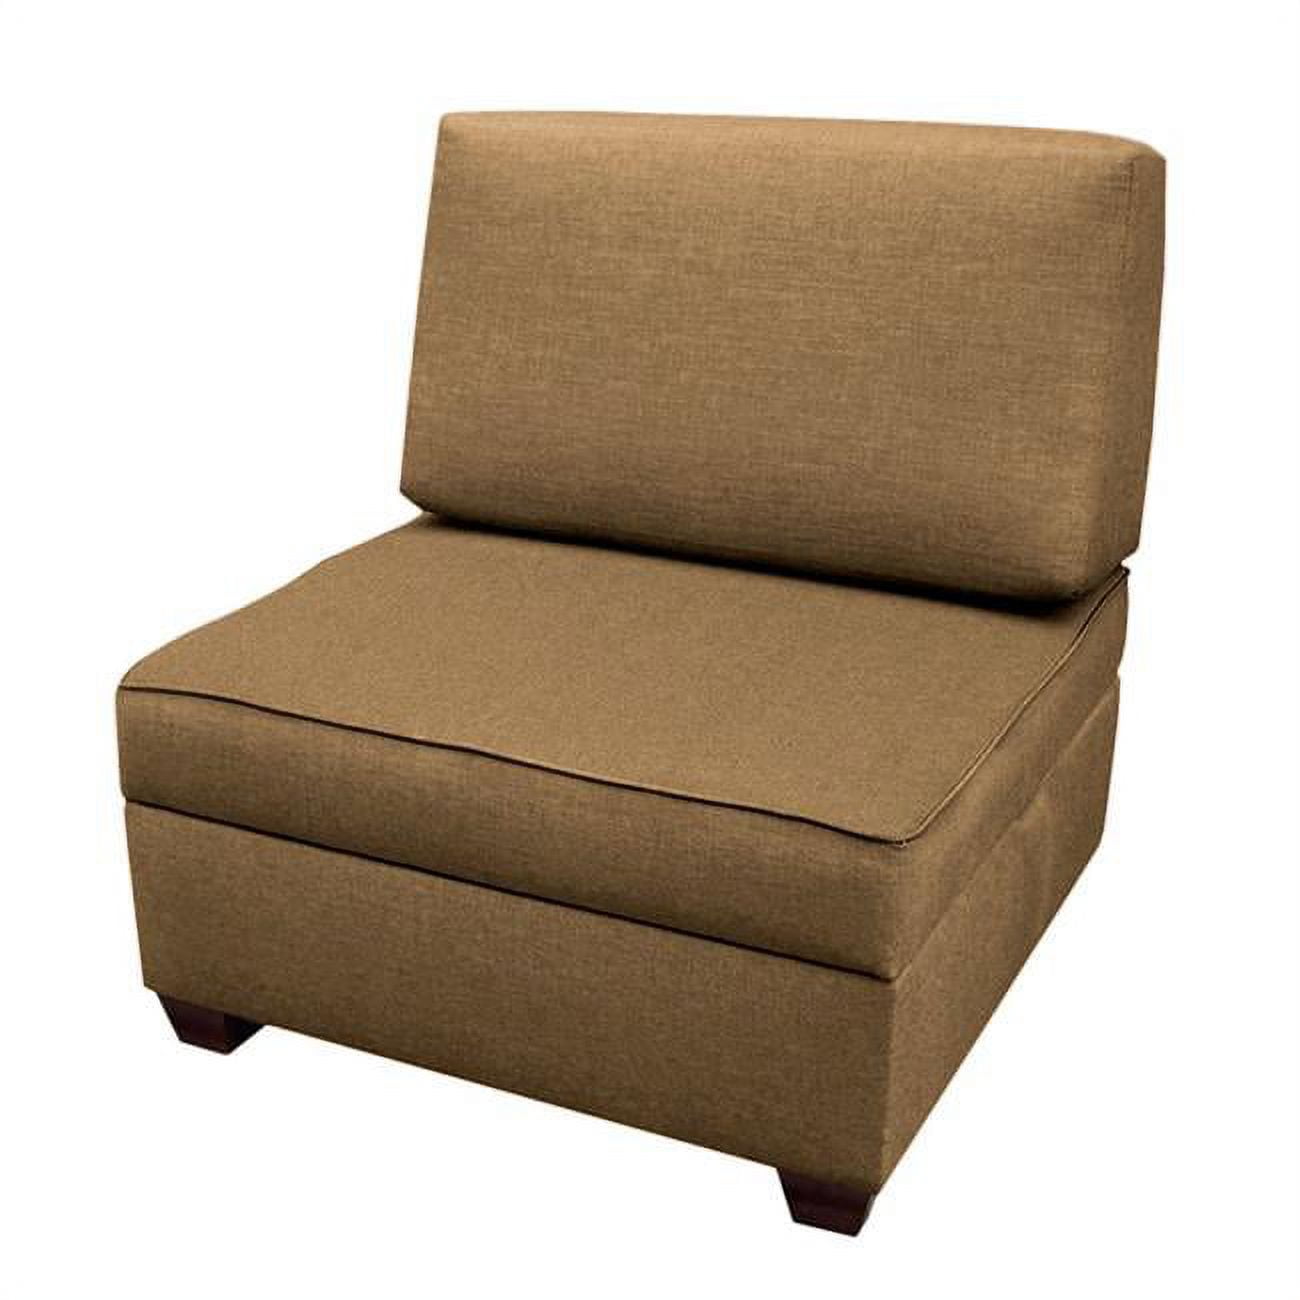 Mfch30-bs 30 In. Chair Plus 1 Bs Storage Ottomans - Mocha